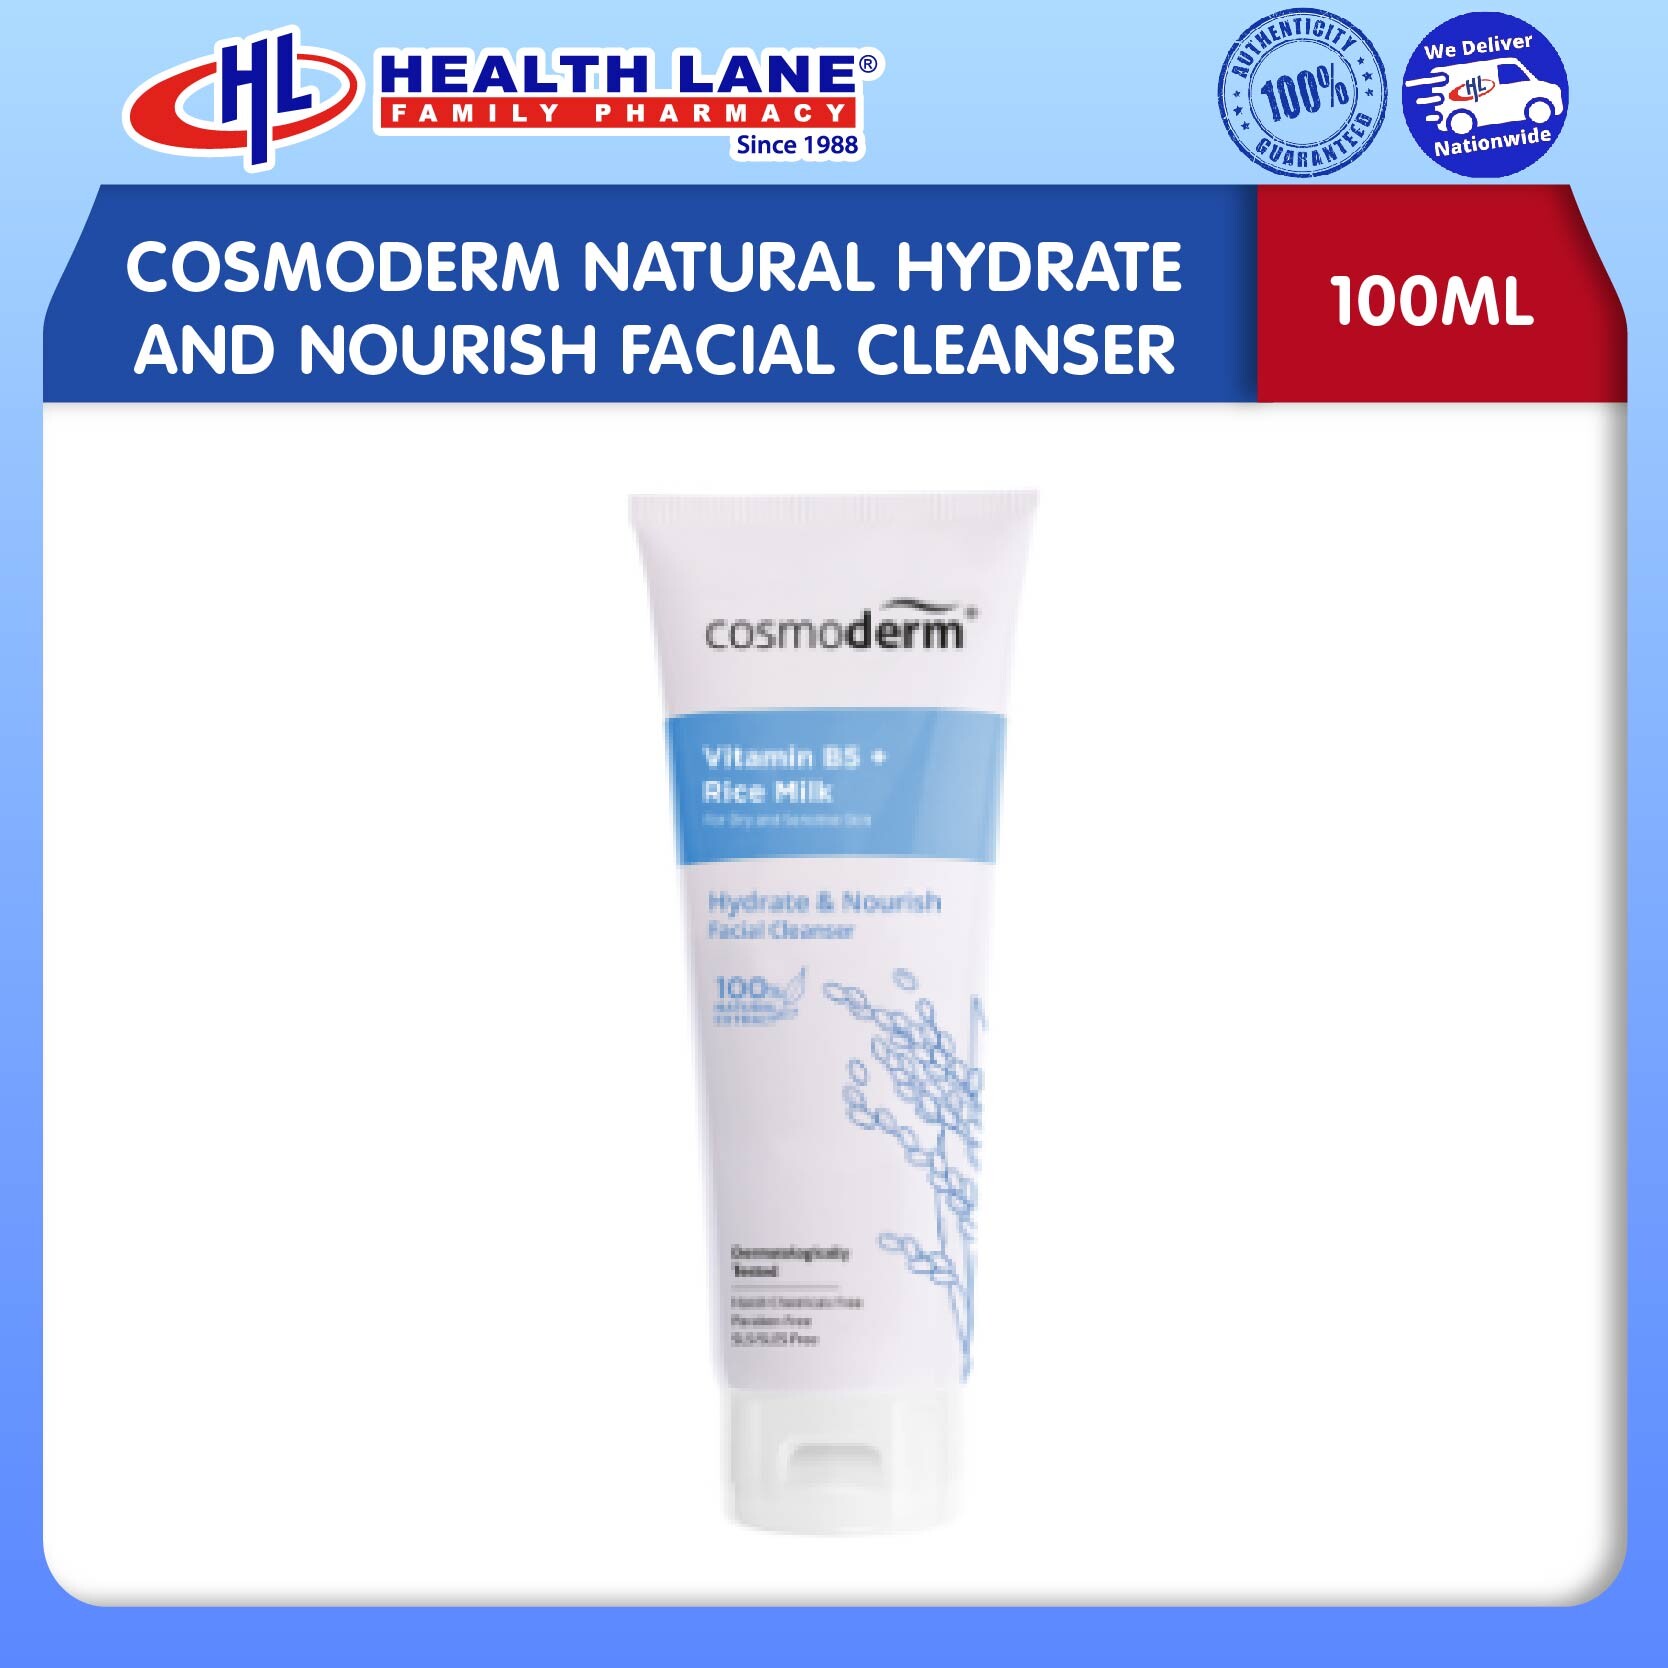 COSMODERM NATURAL HYDRATE AND NOURISH FACIAL CLEANSER (100ML)